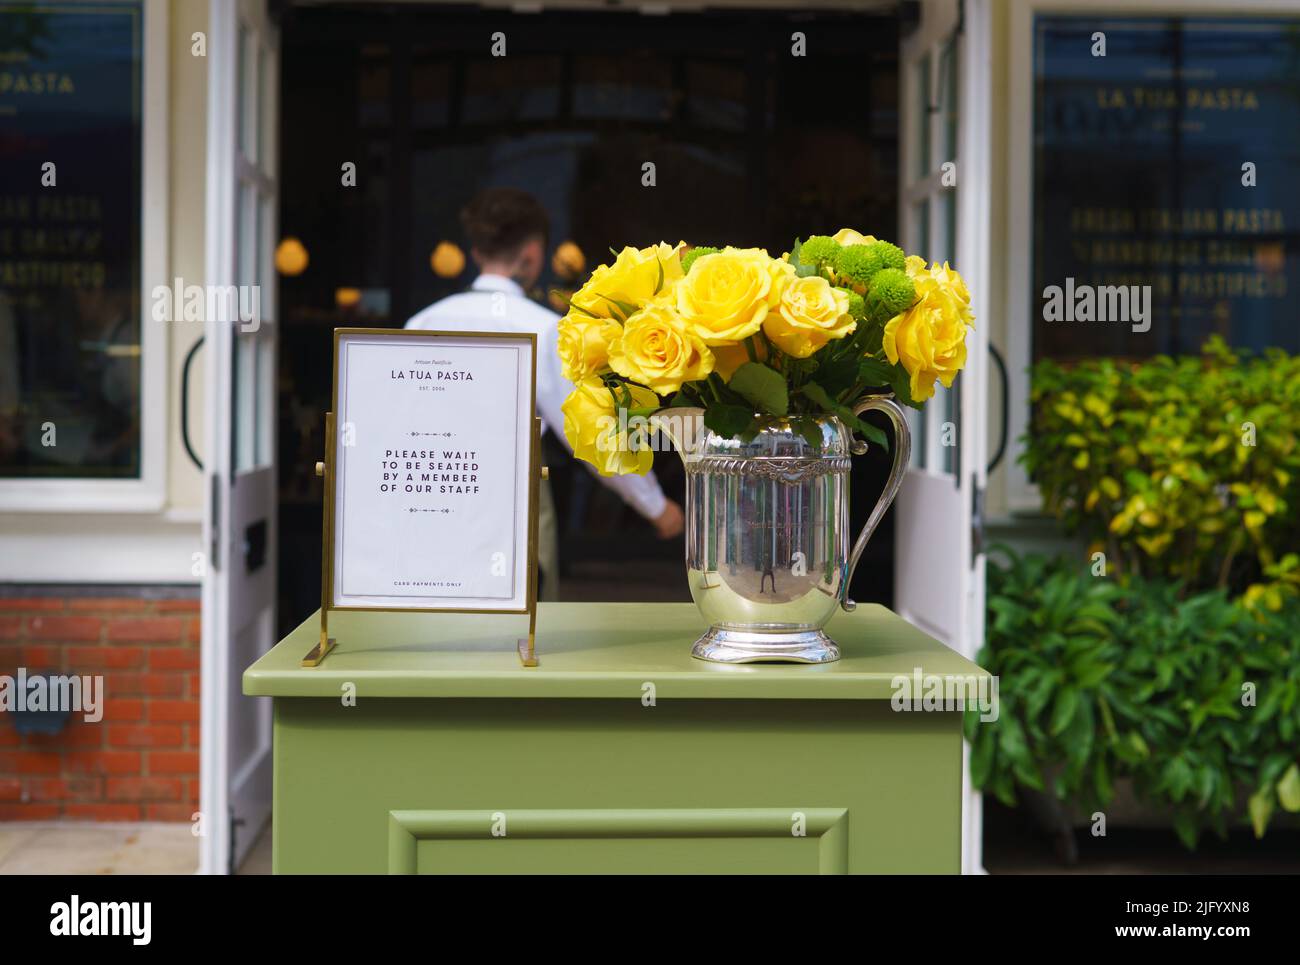 Yellow roses in a silver plated vase on a welcome lectern in front of the La Tua Pasta restaurant at Bicester Village. Stock Photo